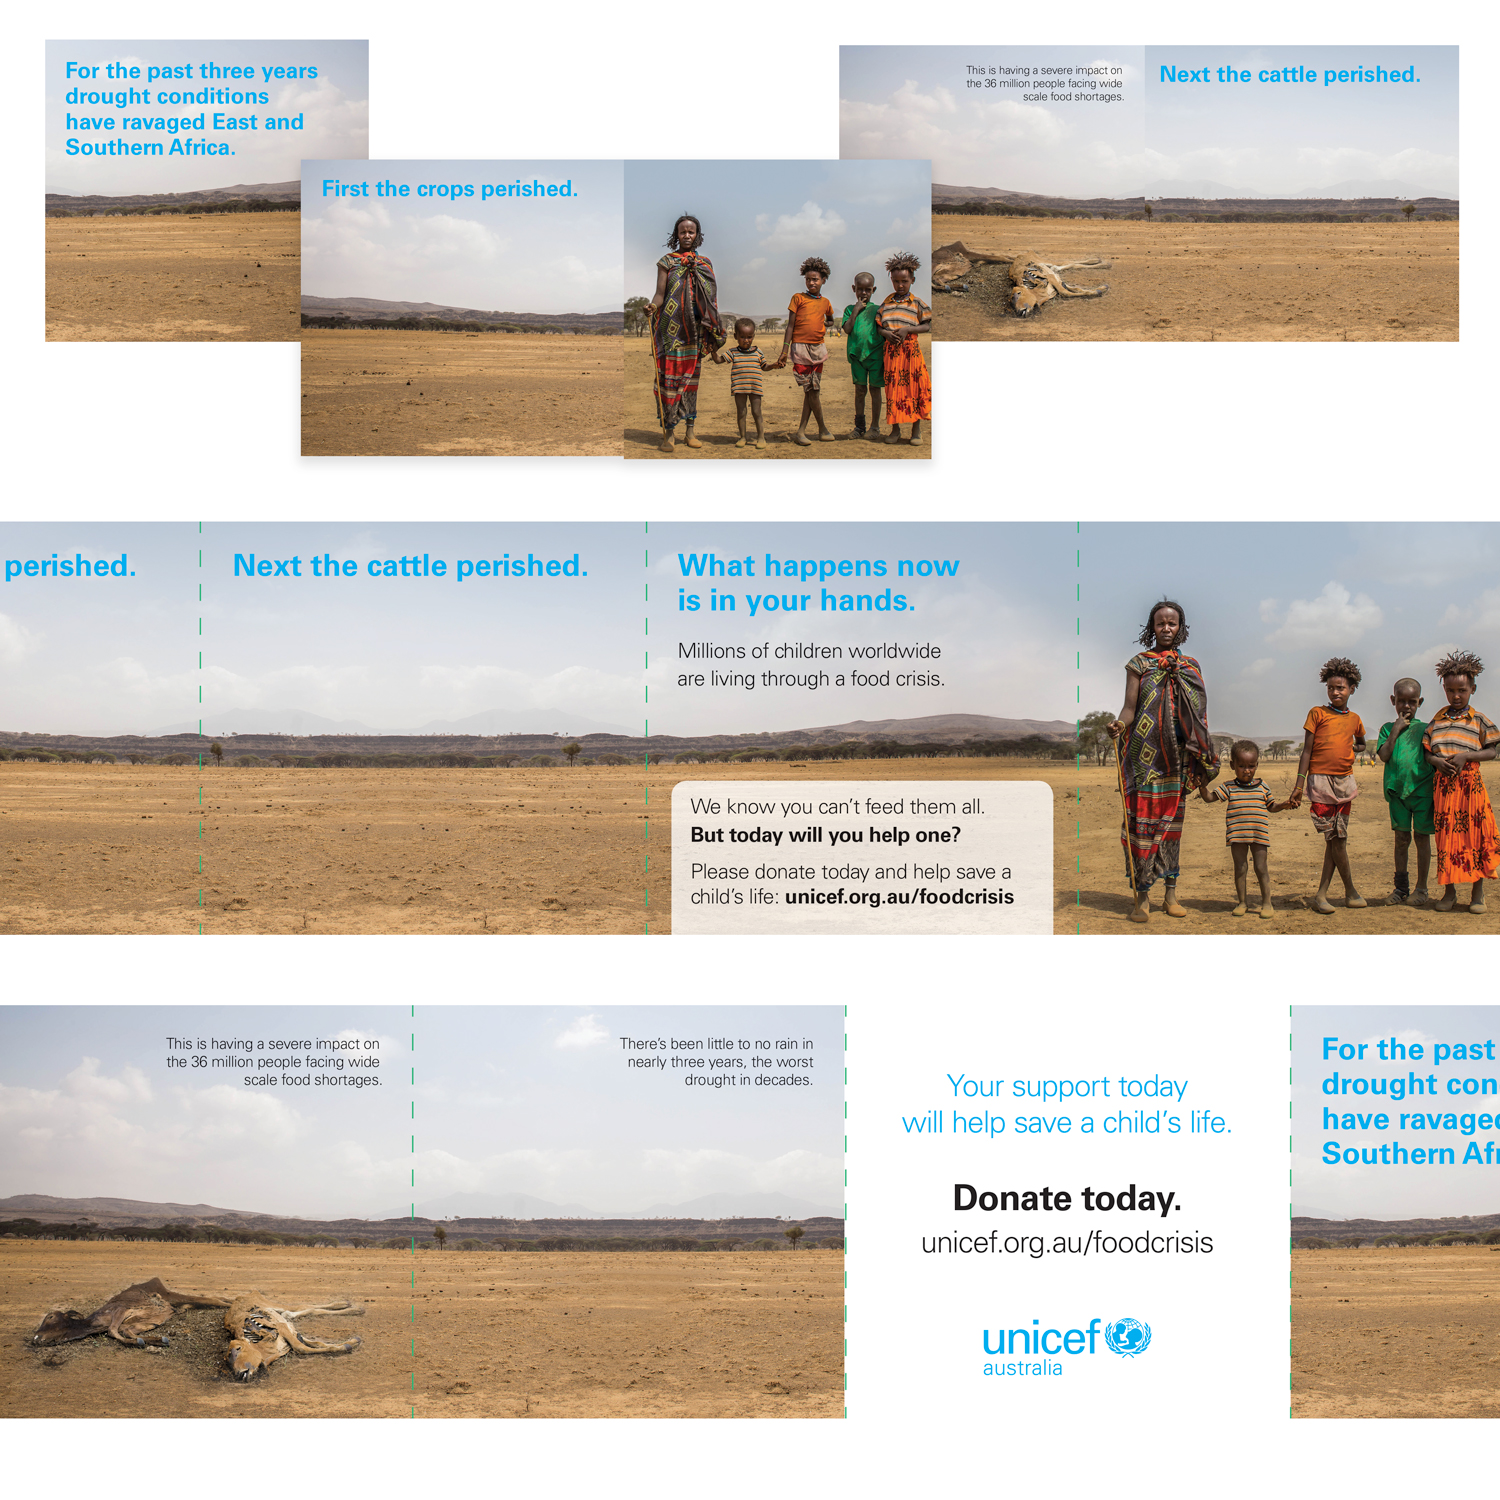 Image of a square roll fold brochure for UNICEF Australia. This was to raise donations for issues stemming from a large drought in Eastern and Southern Africa in 2017.